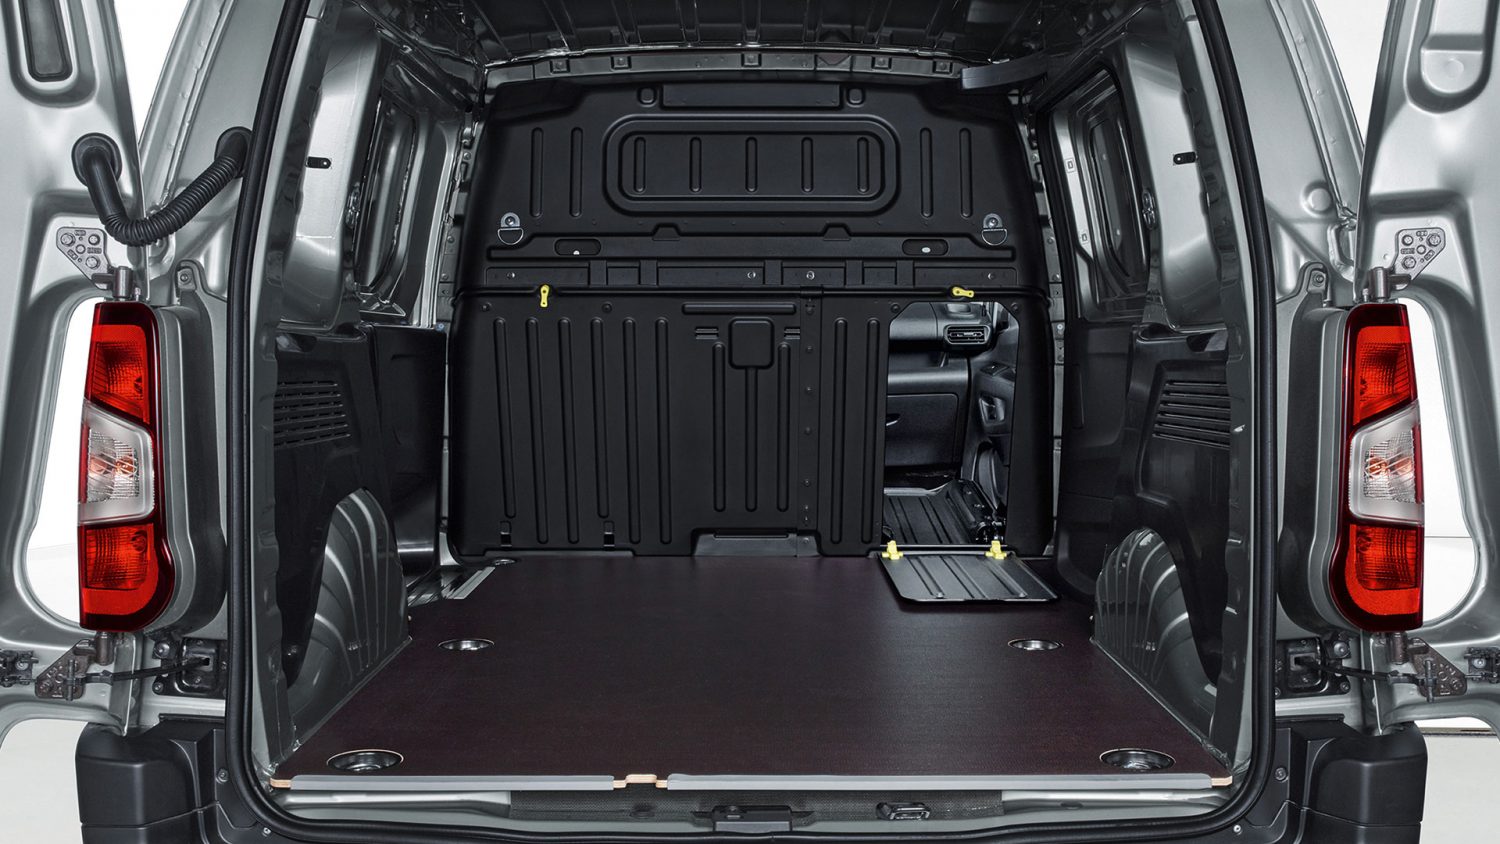 Vauxhall Combo rear interior load space.